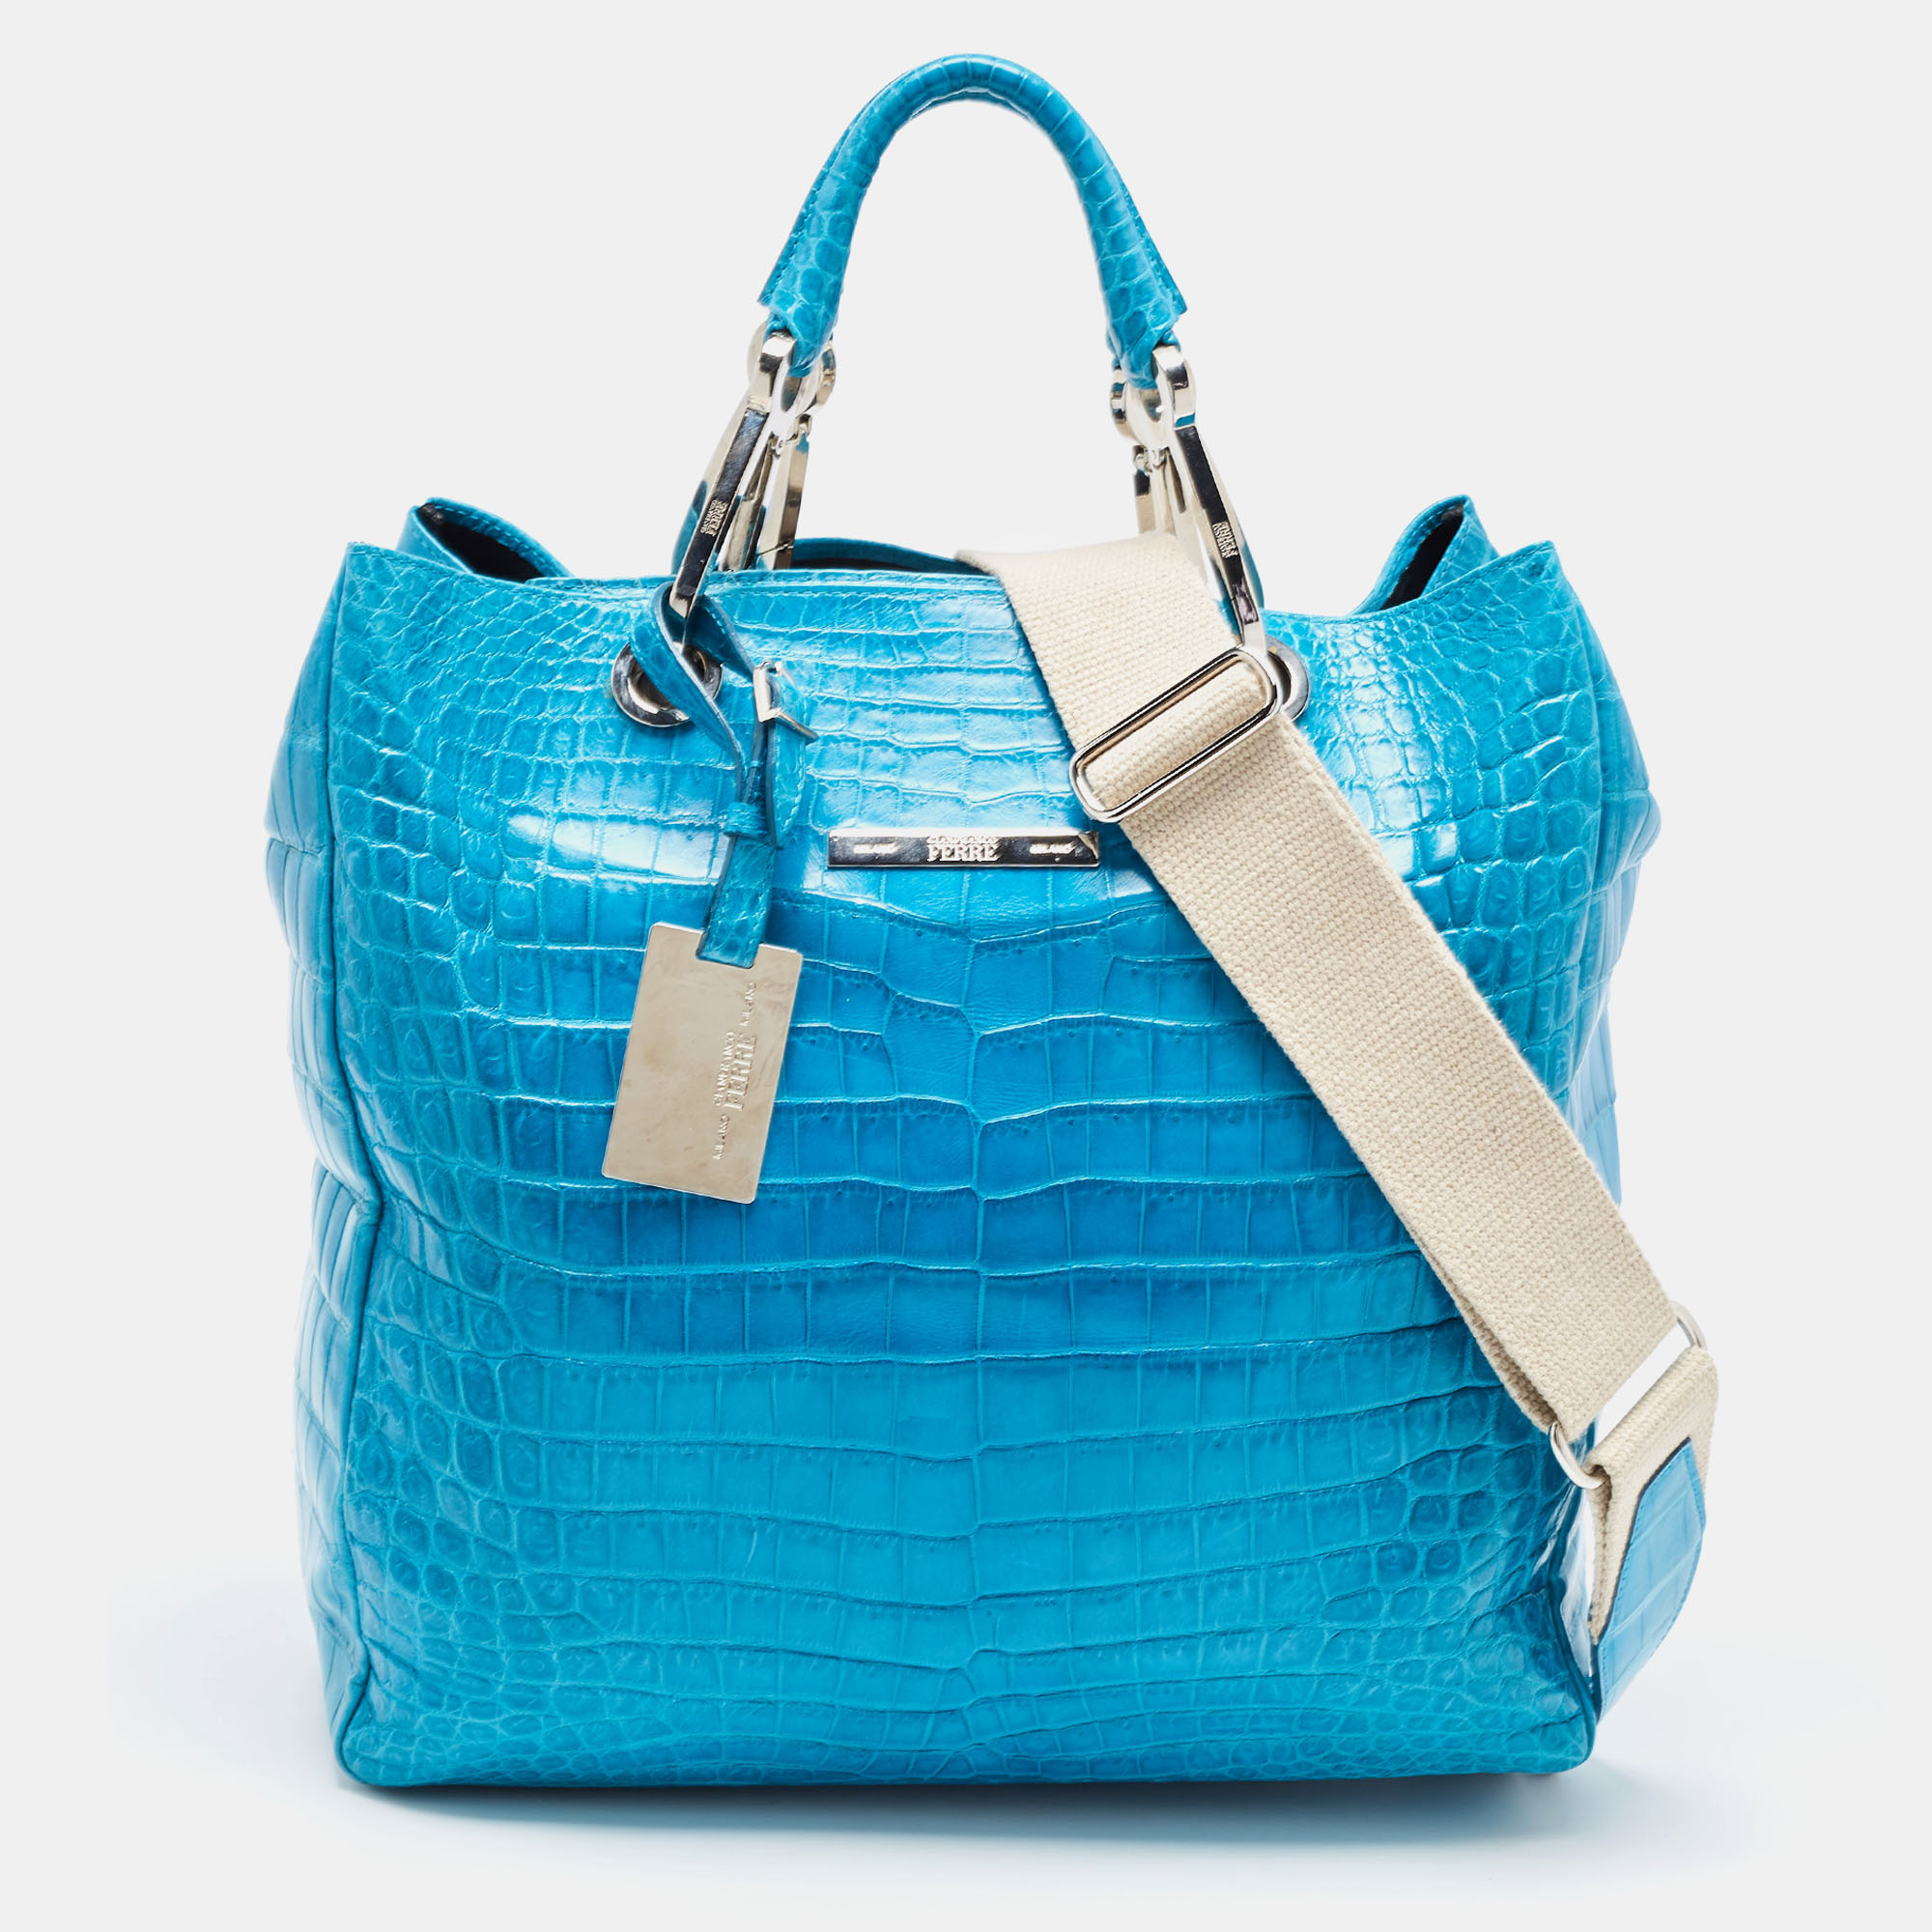 Pre-owned Gianfranco Ferre Turquoise Blue Crocodile Grommet Tote